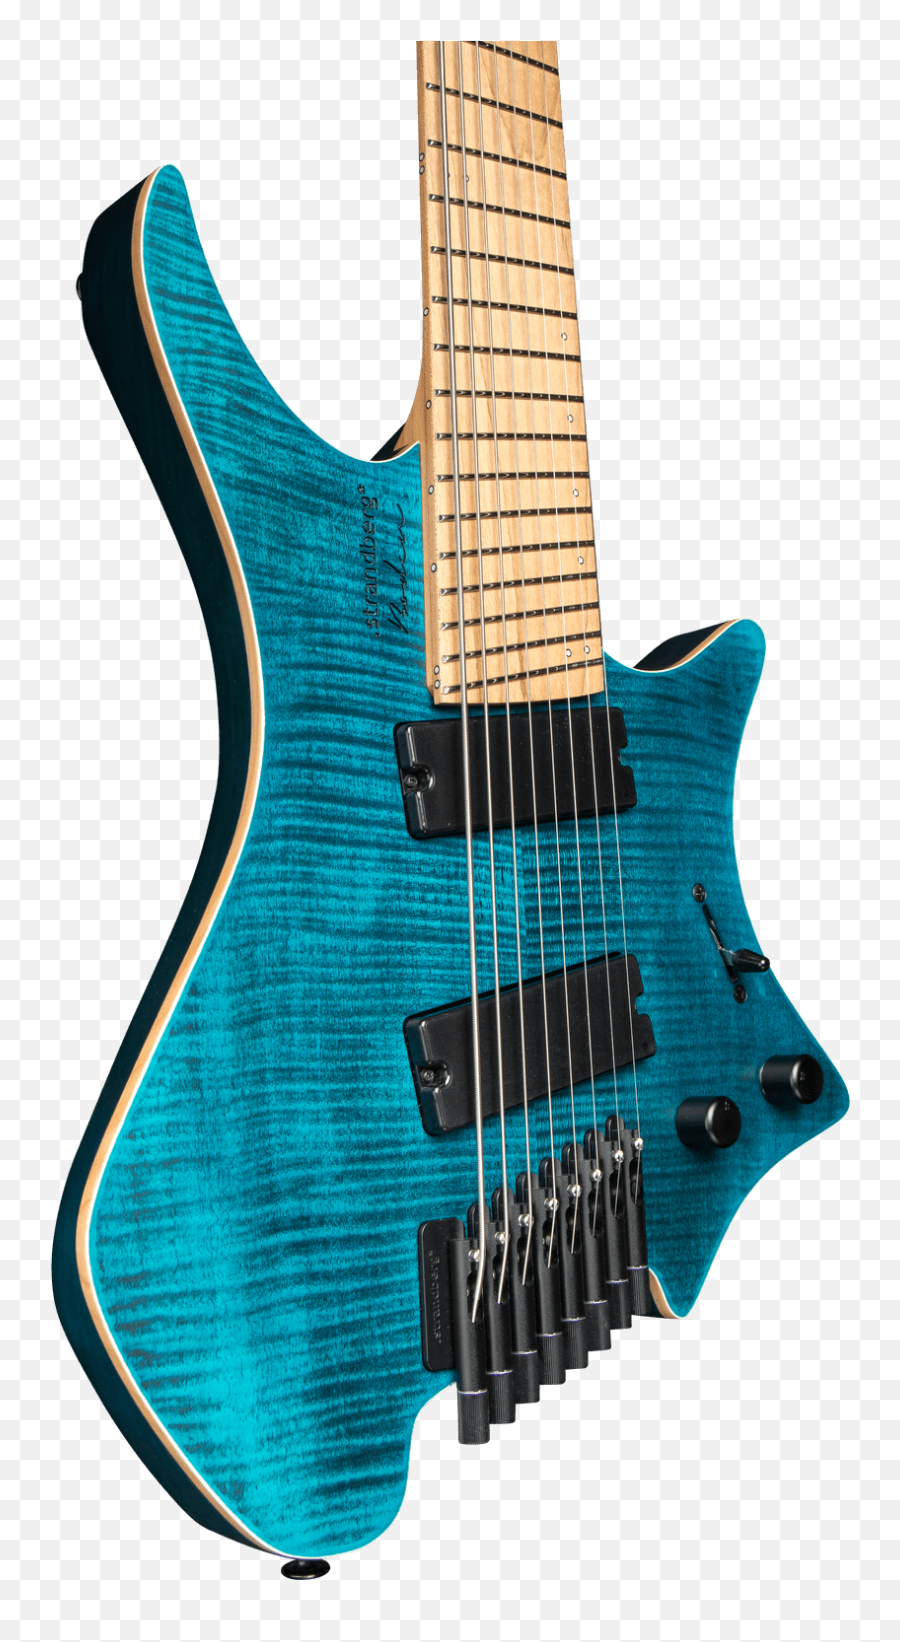 Boden Standard 8 Maple Flame Blue - Electric Guitar Clipart Strandberg Boden Standard 8 Maple Flame Blue Emoji,Electric Guitar Clipart